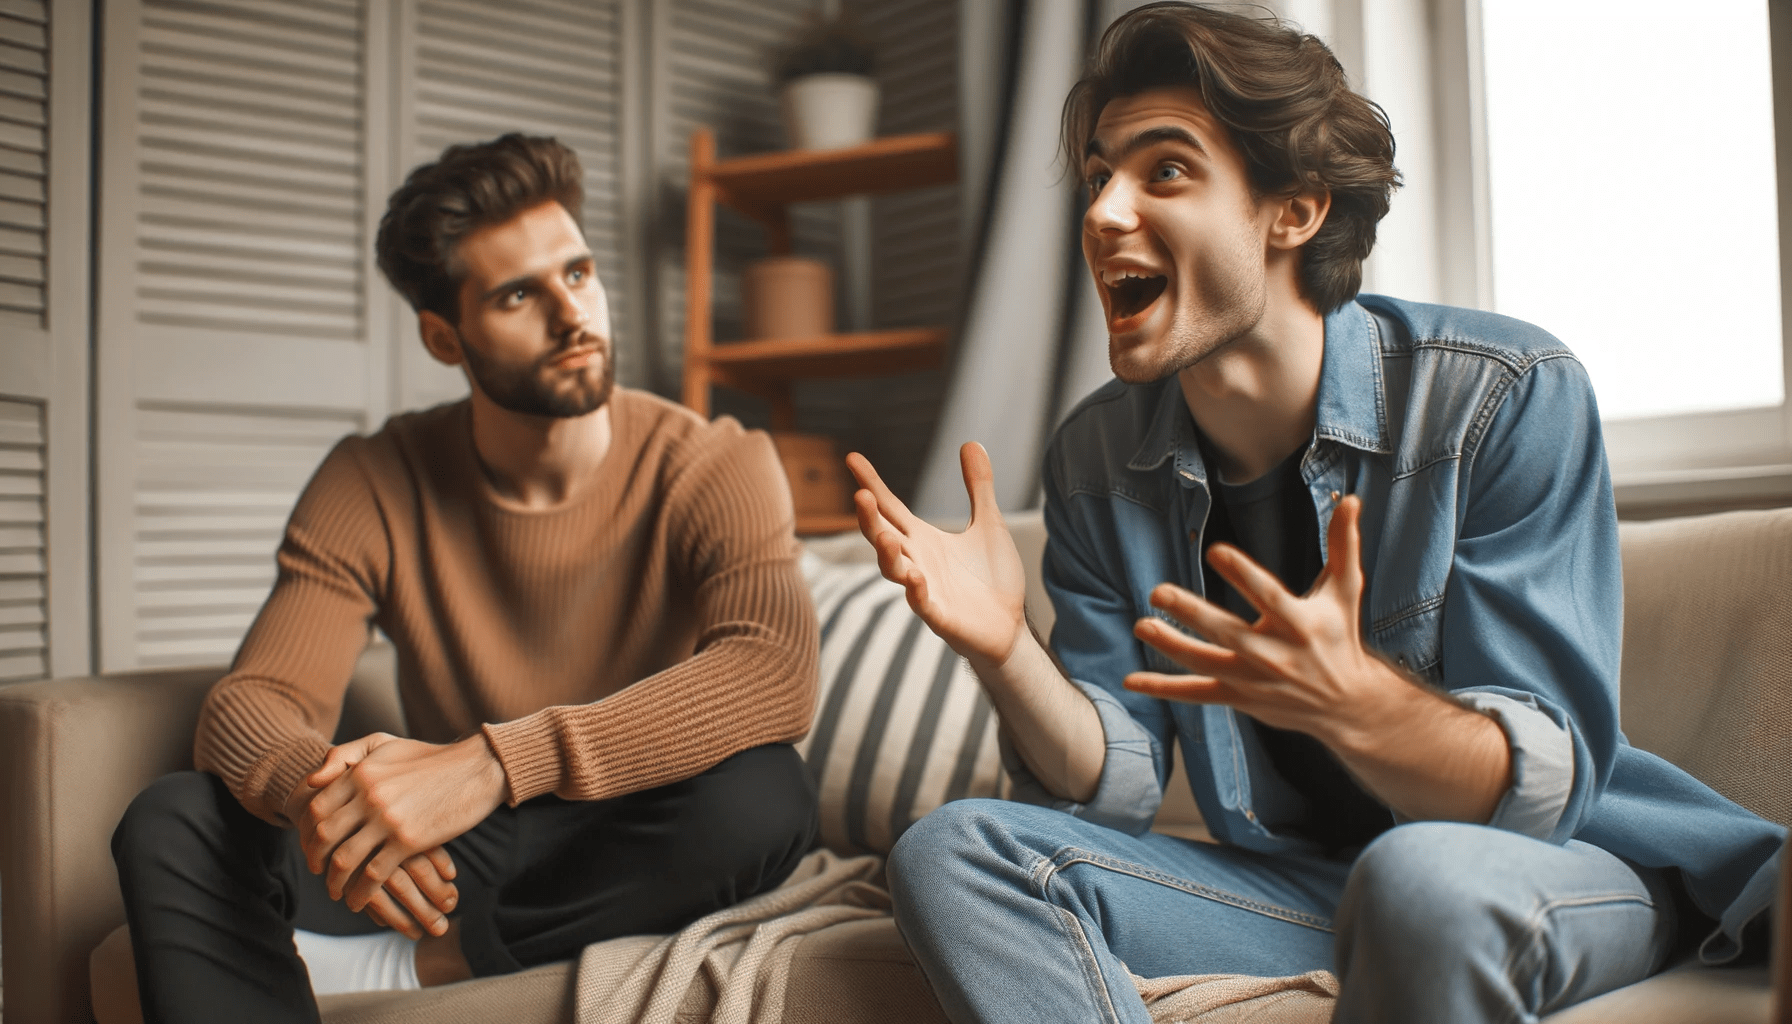 two friends engaged in a conversation in a cozy living room setting. One friend is passionately speaking their face animated and